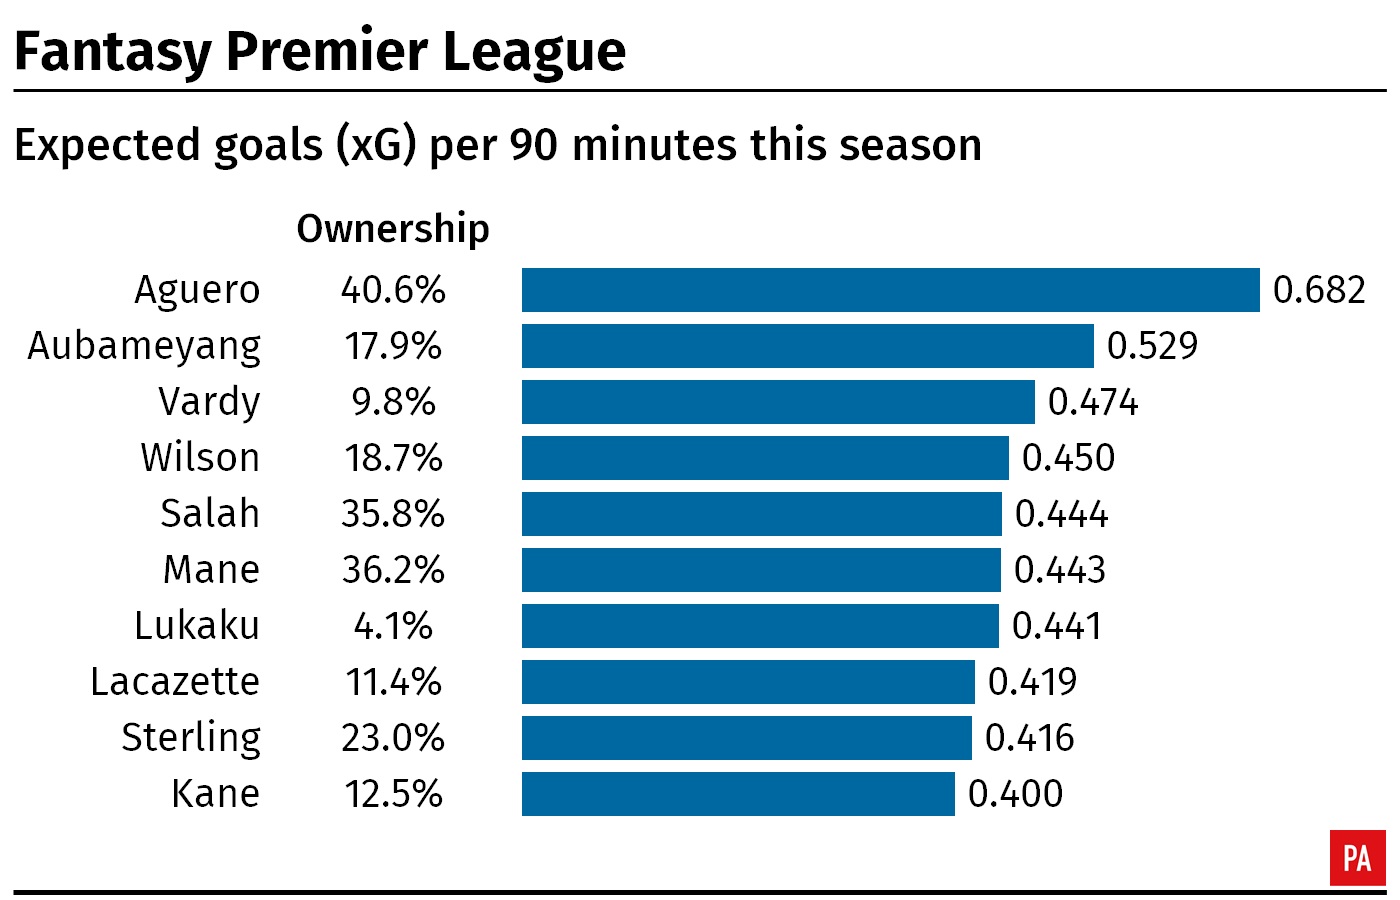 A graphic showing expected goals per 90 minutes this season in the Premier League